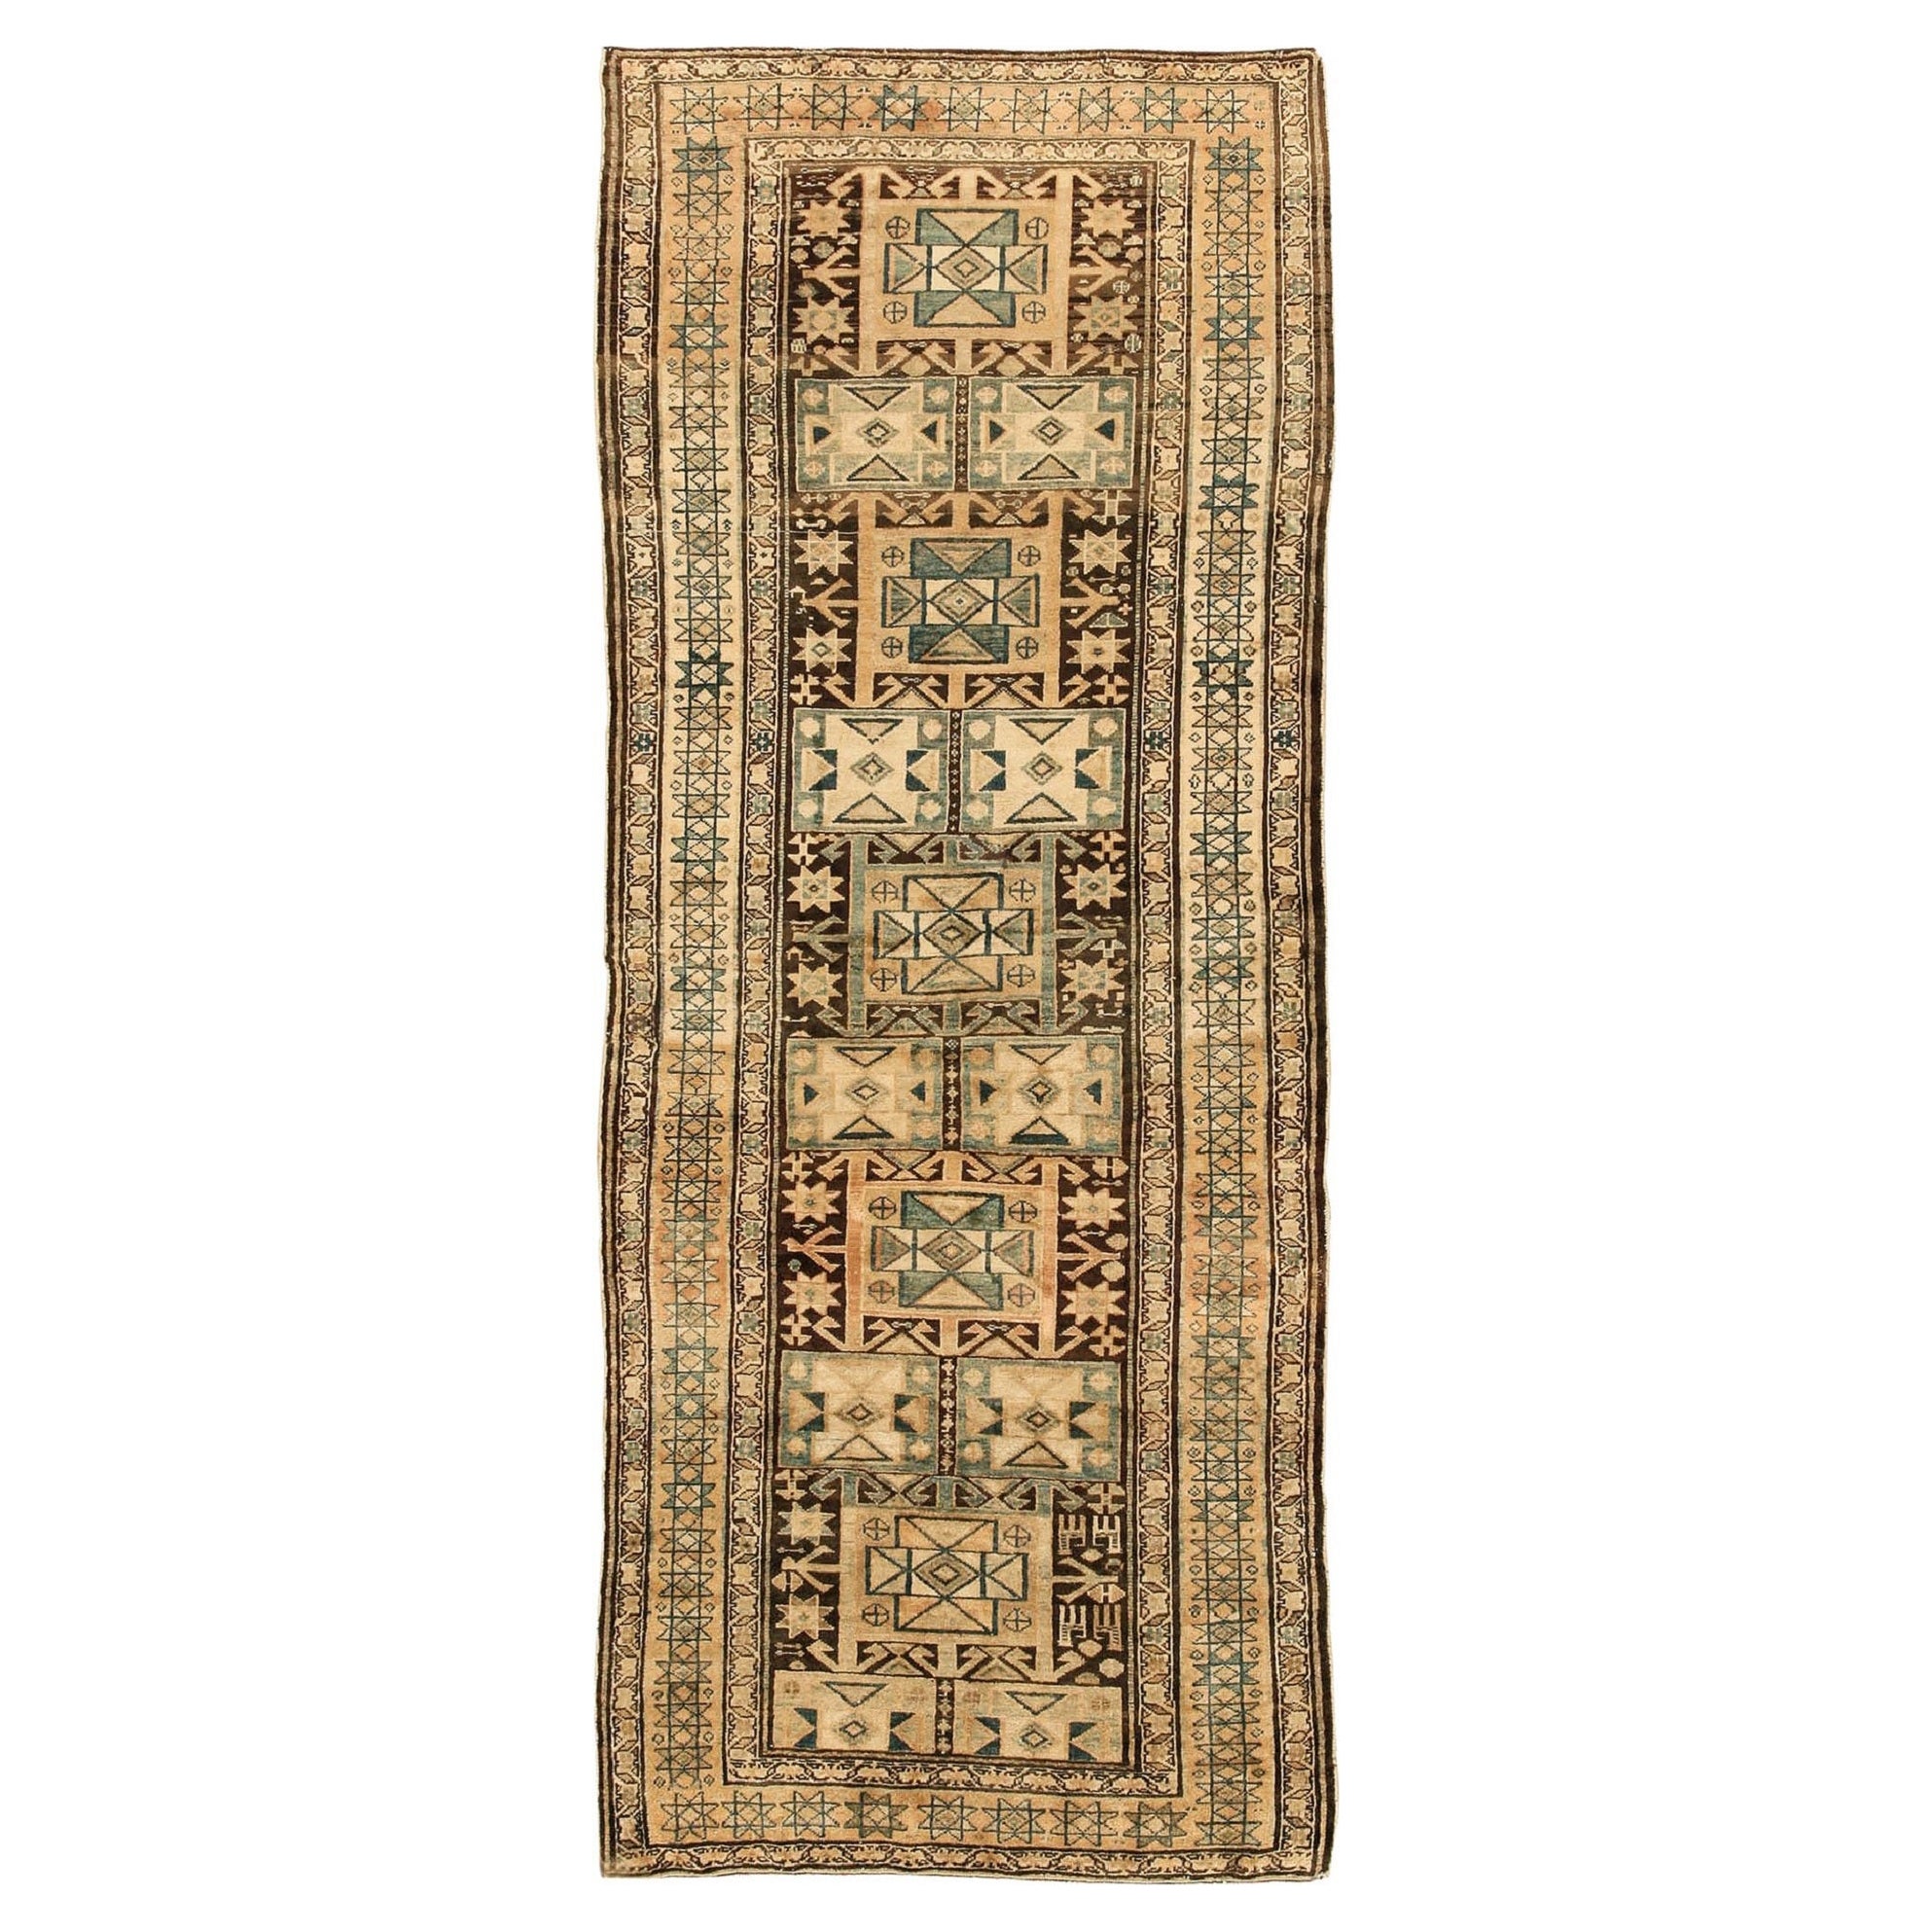 Nazmiyal Collection Antique Persian Malayer Runner. 3' 9" x 9' 7"